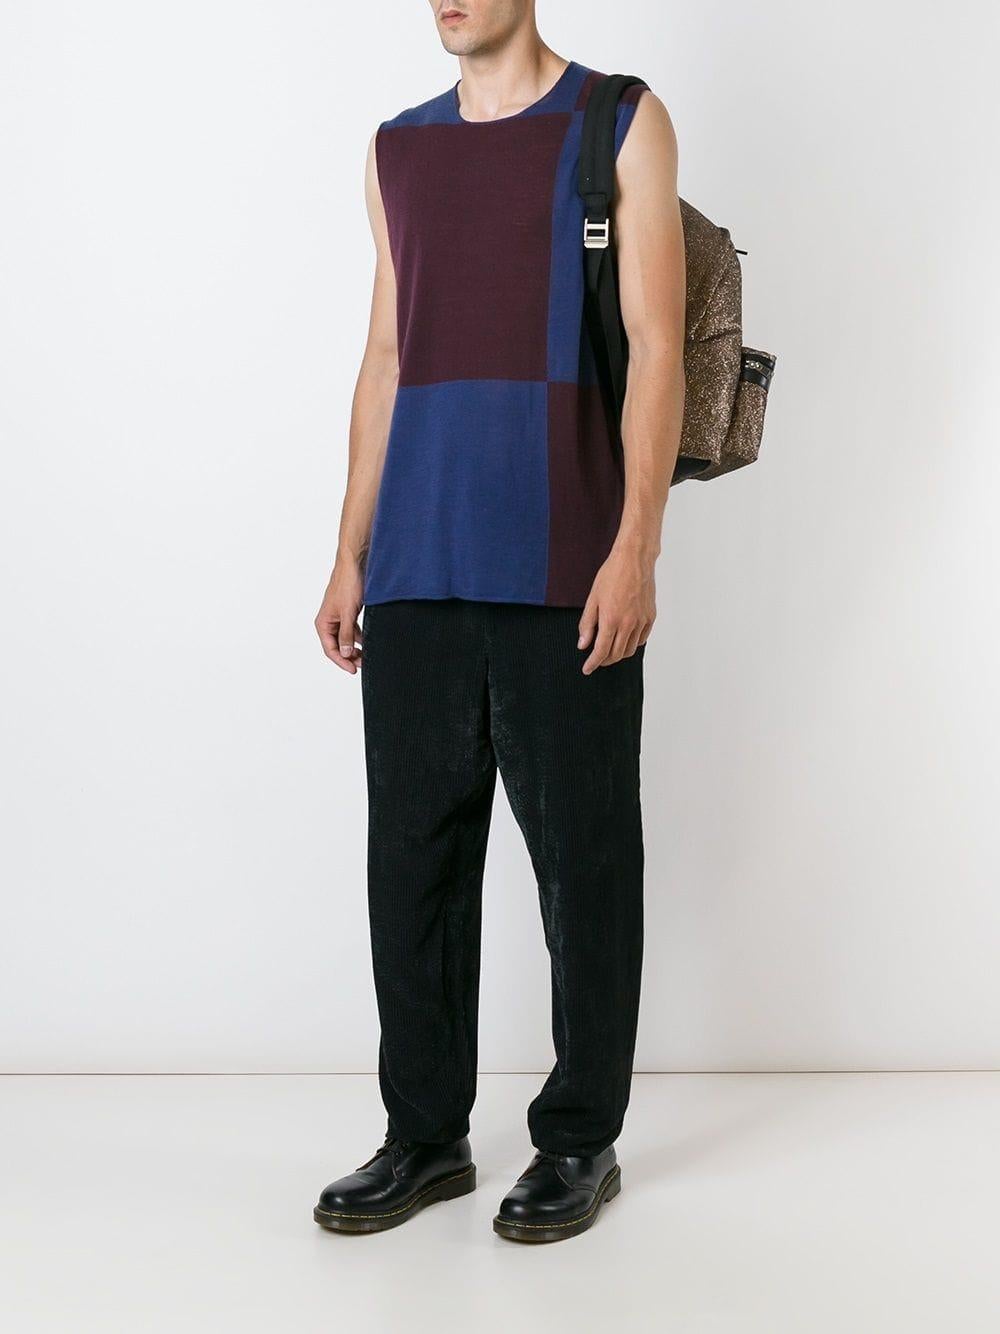 Comme Des Garçons wool blend top with colour block in purple and blue, straight cut, round neckline, sleeveless.

Years: 1990s

Made in Japan

Size: L

Linear measures 
Height: 75 cm
Bust: 53 cm